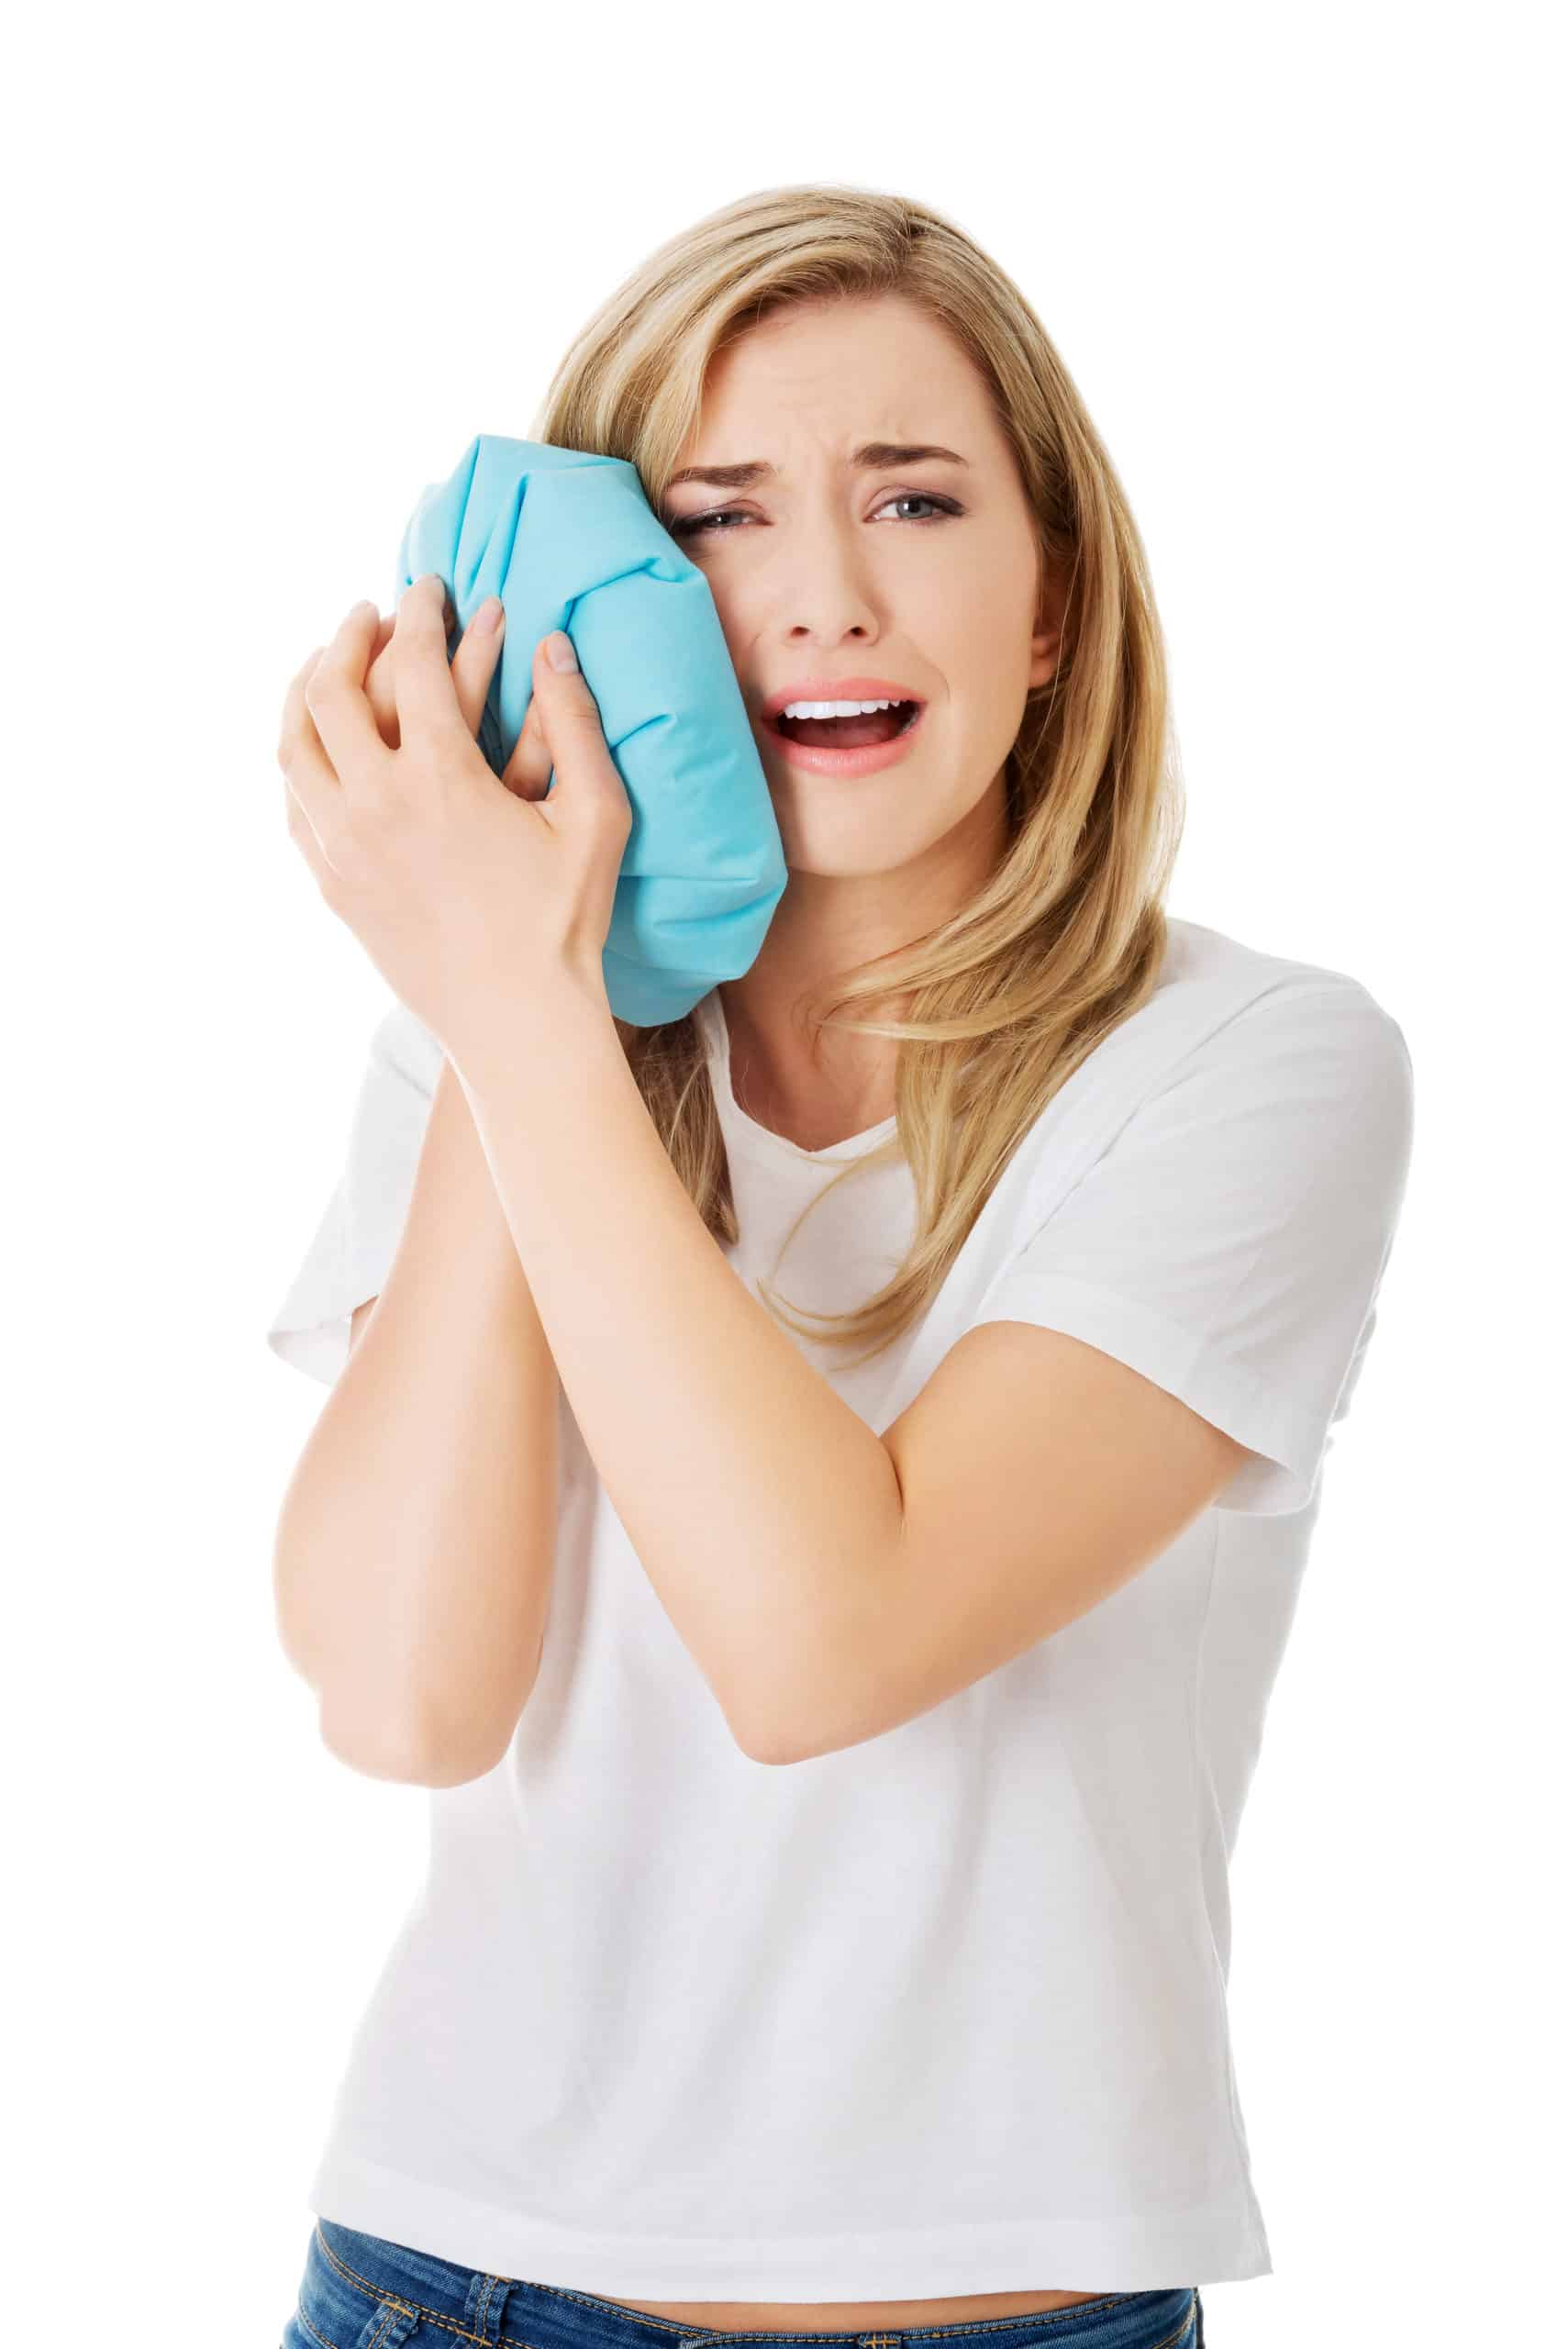 Woman heaving tooth ache, holding ice bag